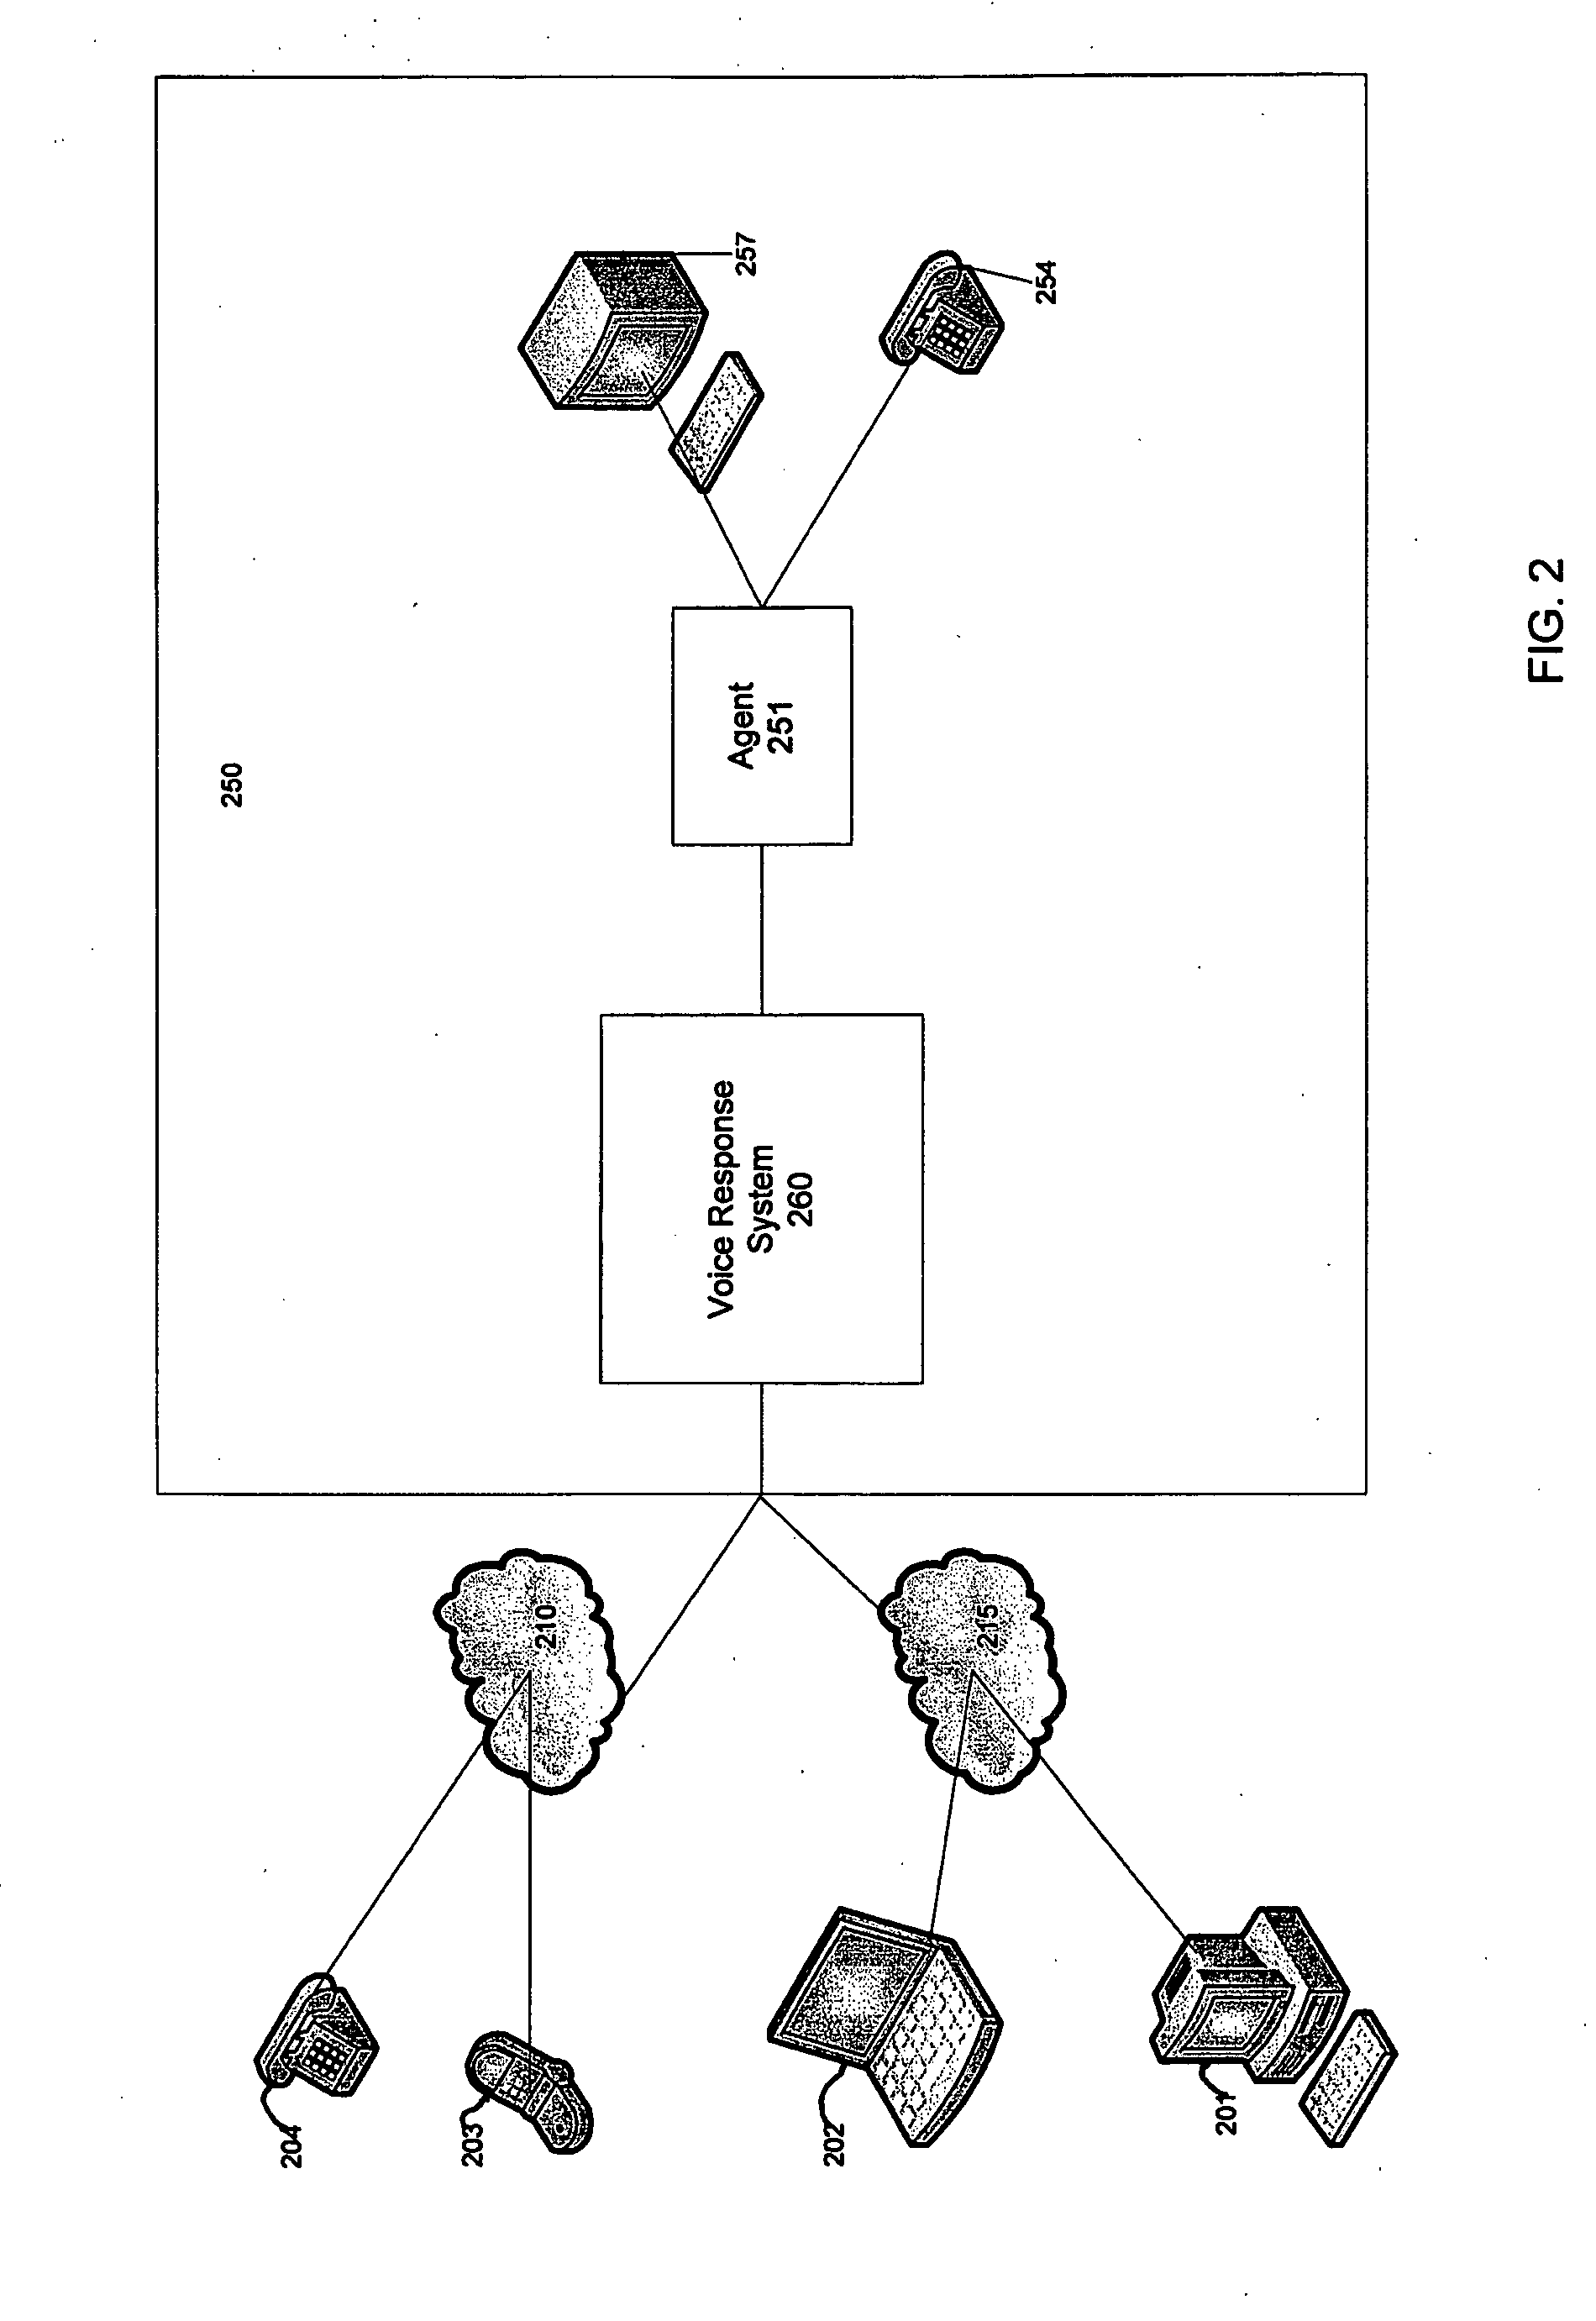 Transparent voice registration and verification method and system